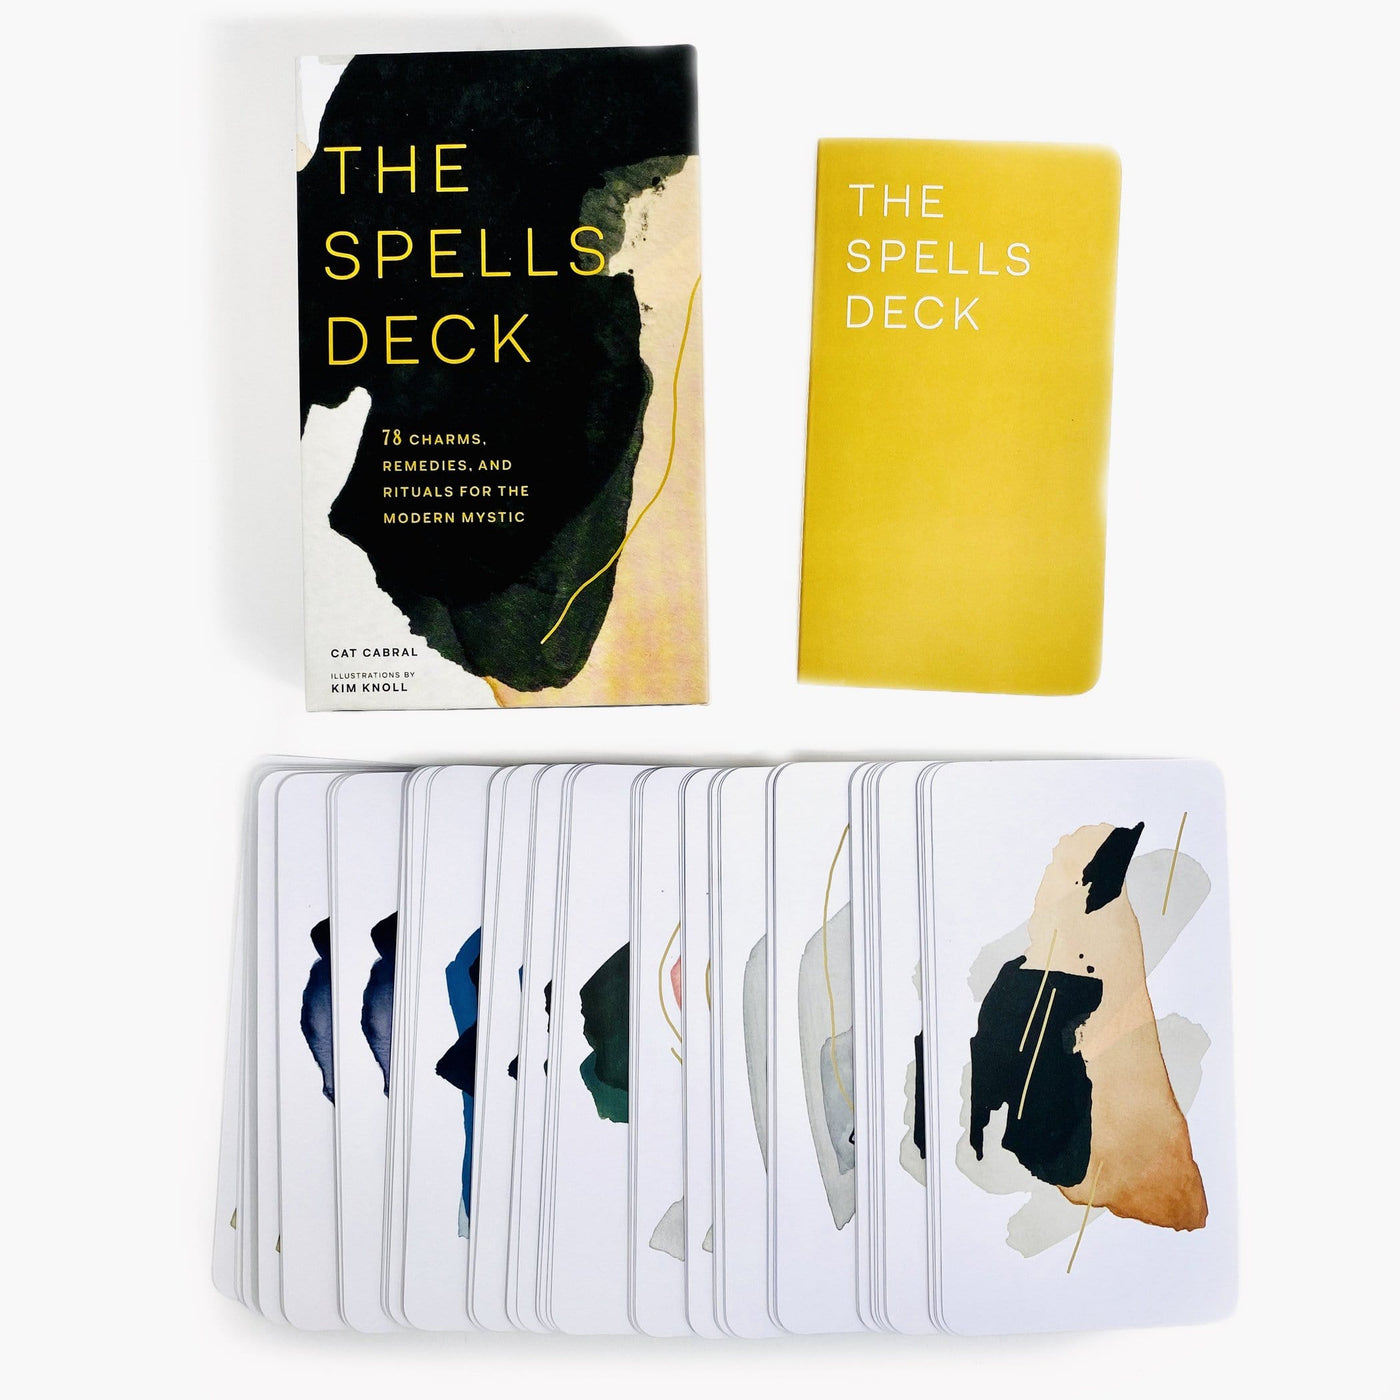 Enhance your life with magic with the spells deck cards,  This enchanting deck features 78 rituals, spells, and recipes for love, empowerment, healing, and so much more.